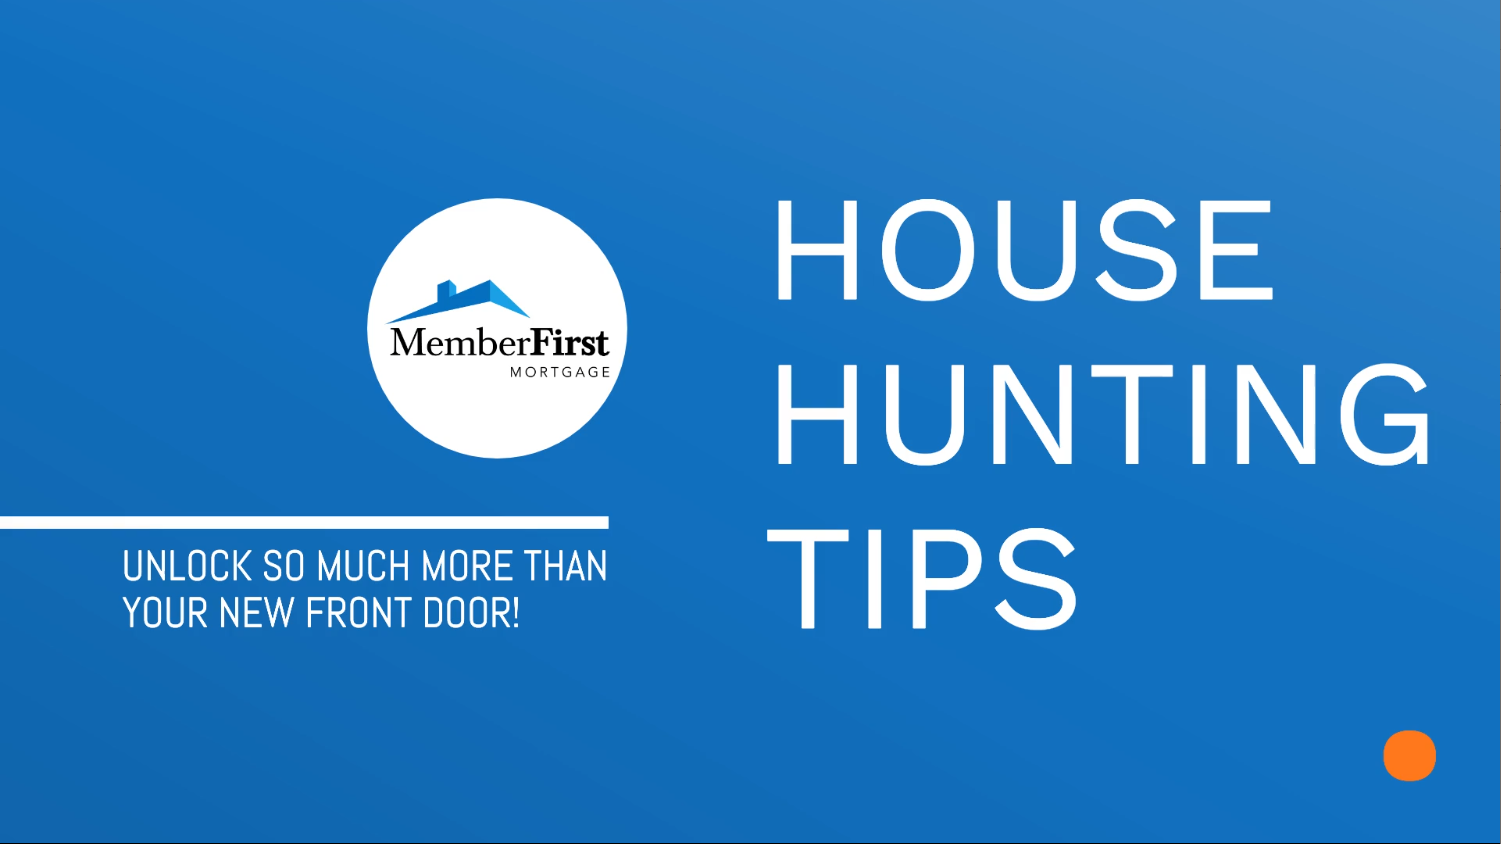 House Hunting Tips